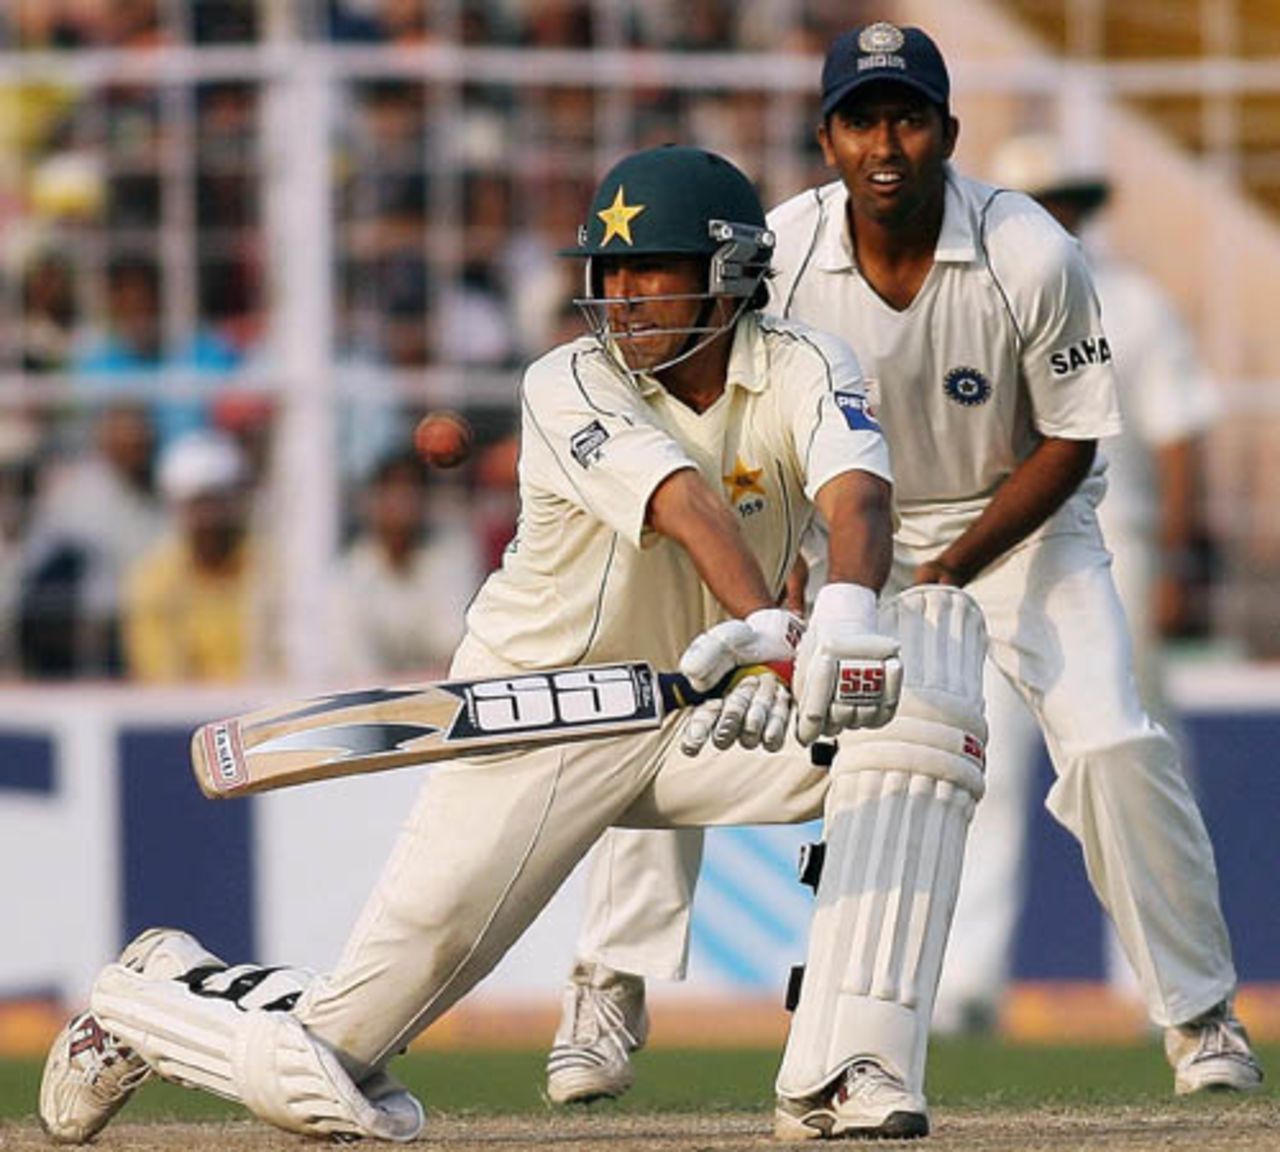 Wasim Jaffer watches as Younis Khan tries the reverse-sweep, India v Pakistan, 2nd Test, Kolkata, 5th day, December 4, 2007